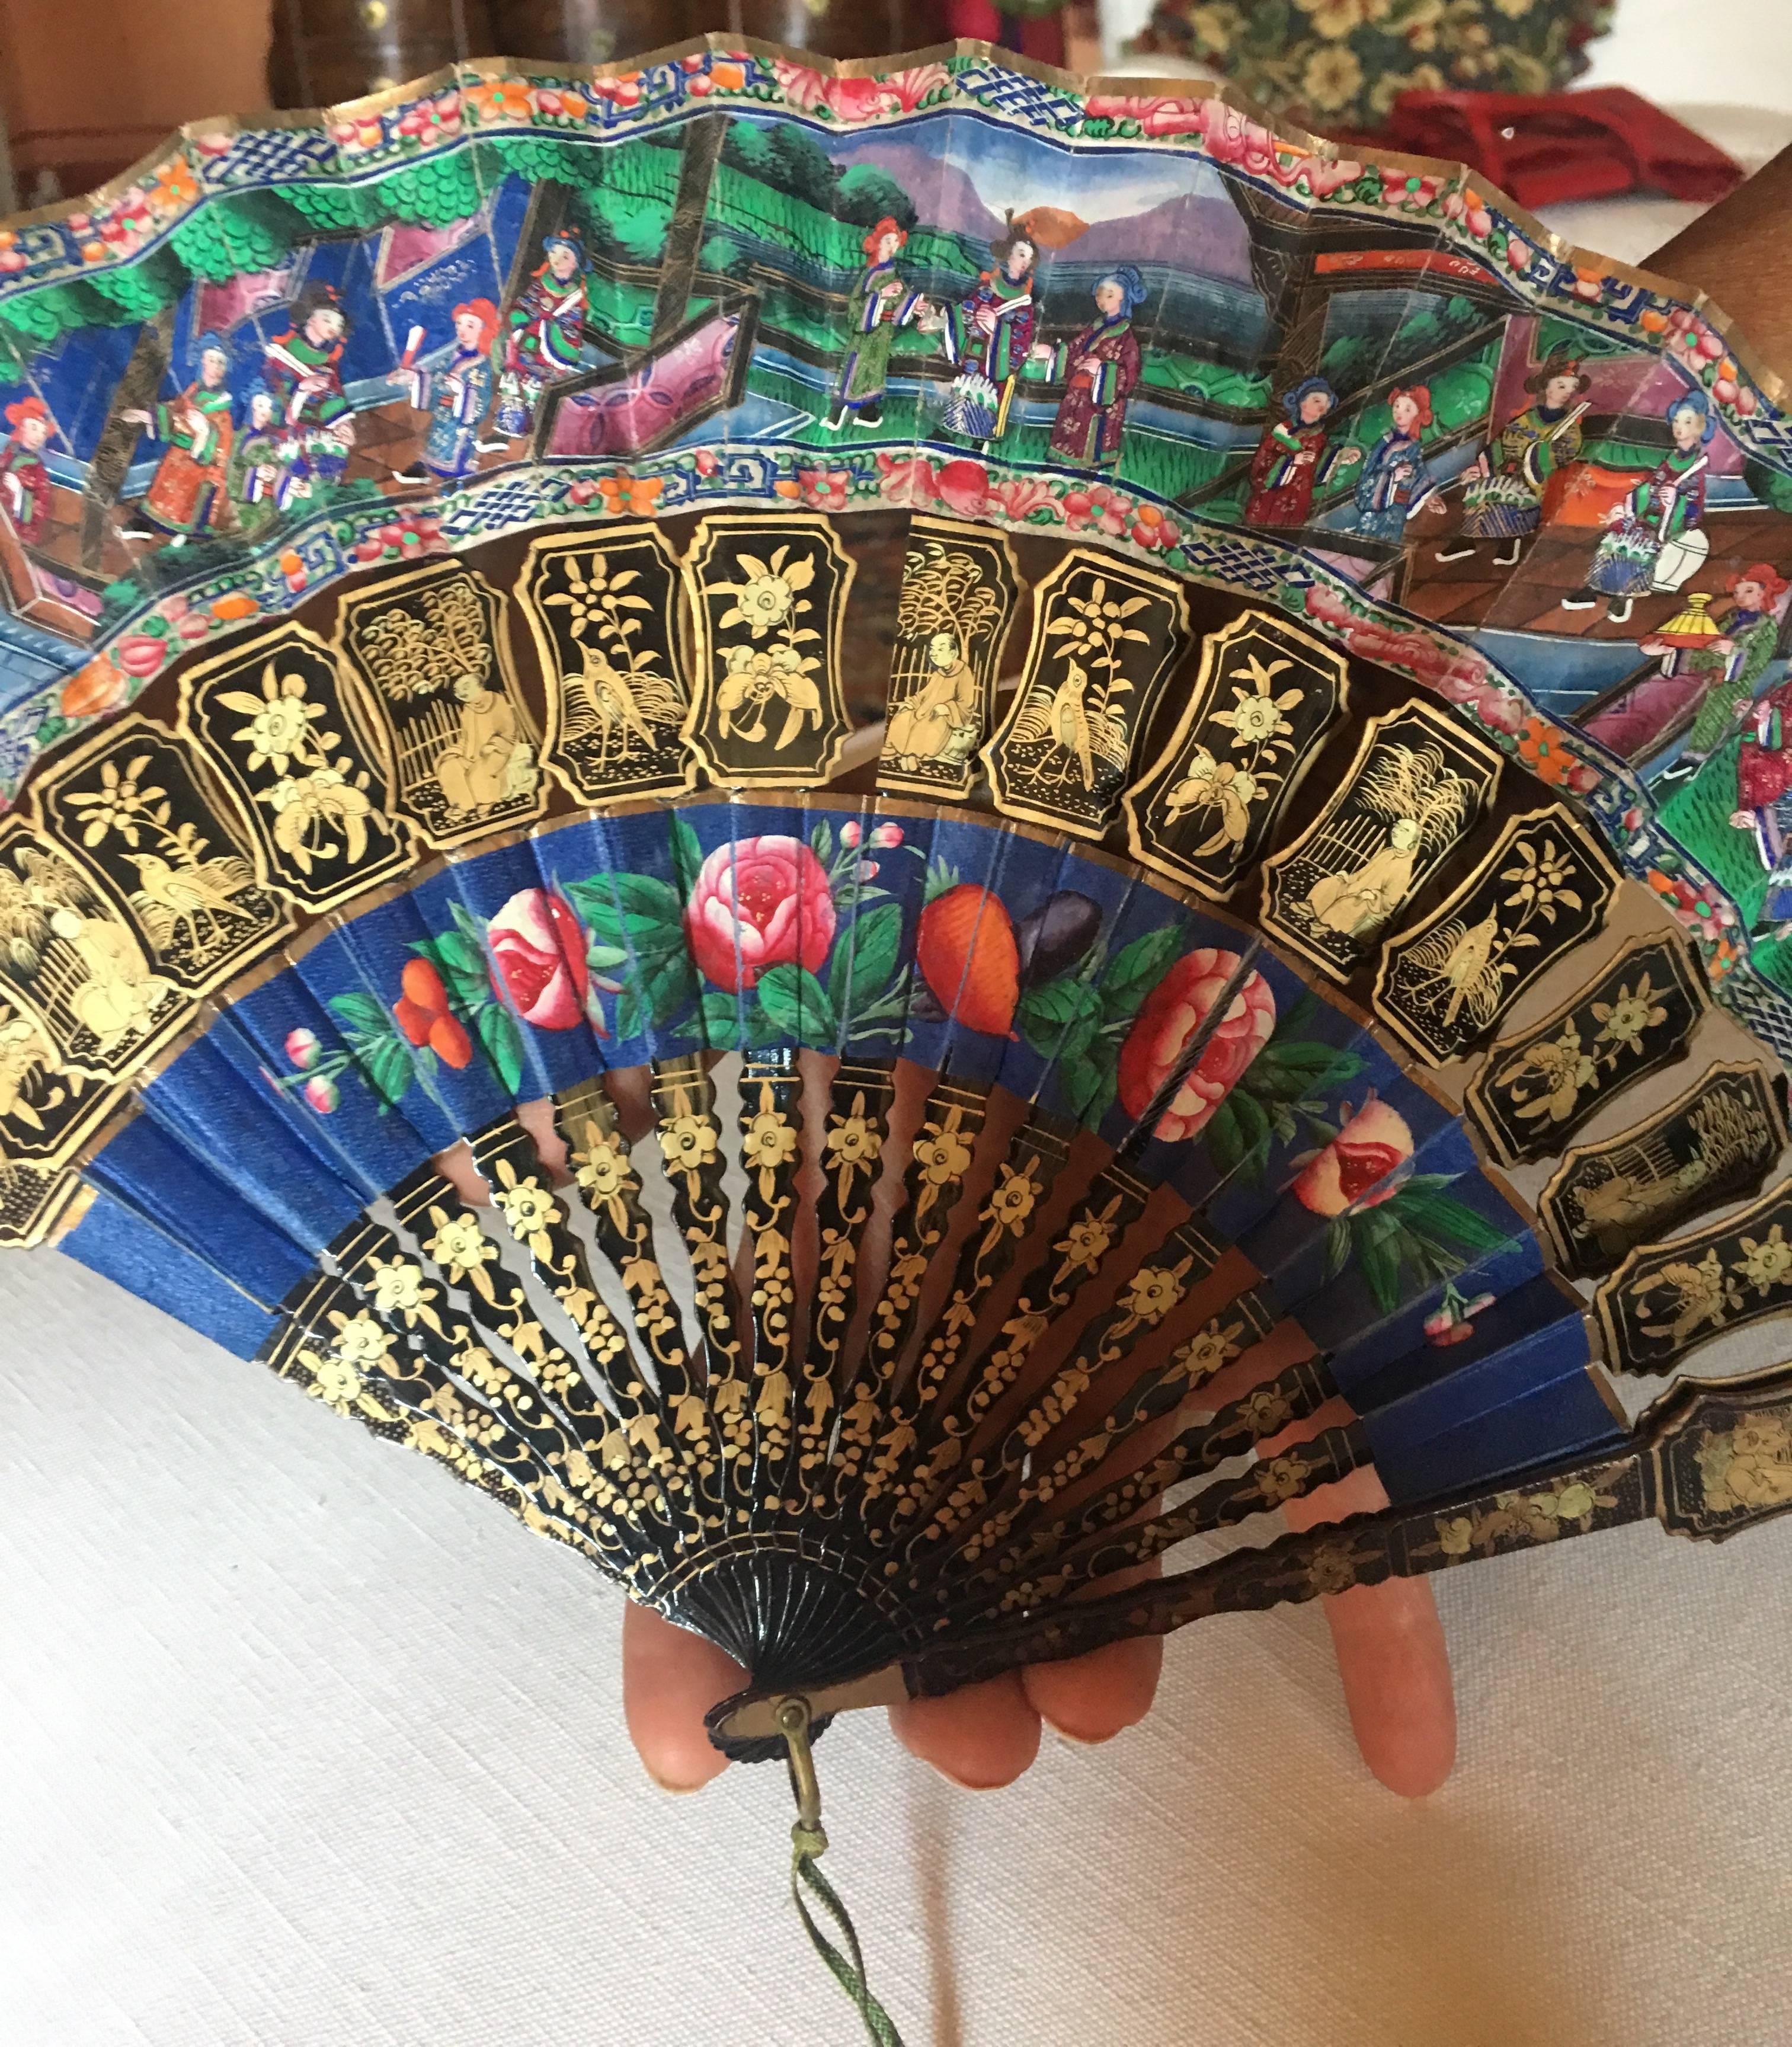 The origins of the so-called Mandarin fan lie in early 19th century China and in the profitable export trade with Europe the Chinese so successfully conducted.
The Mandarin fan as an export article was mentioned in Europe as early as 1789 (see